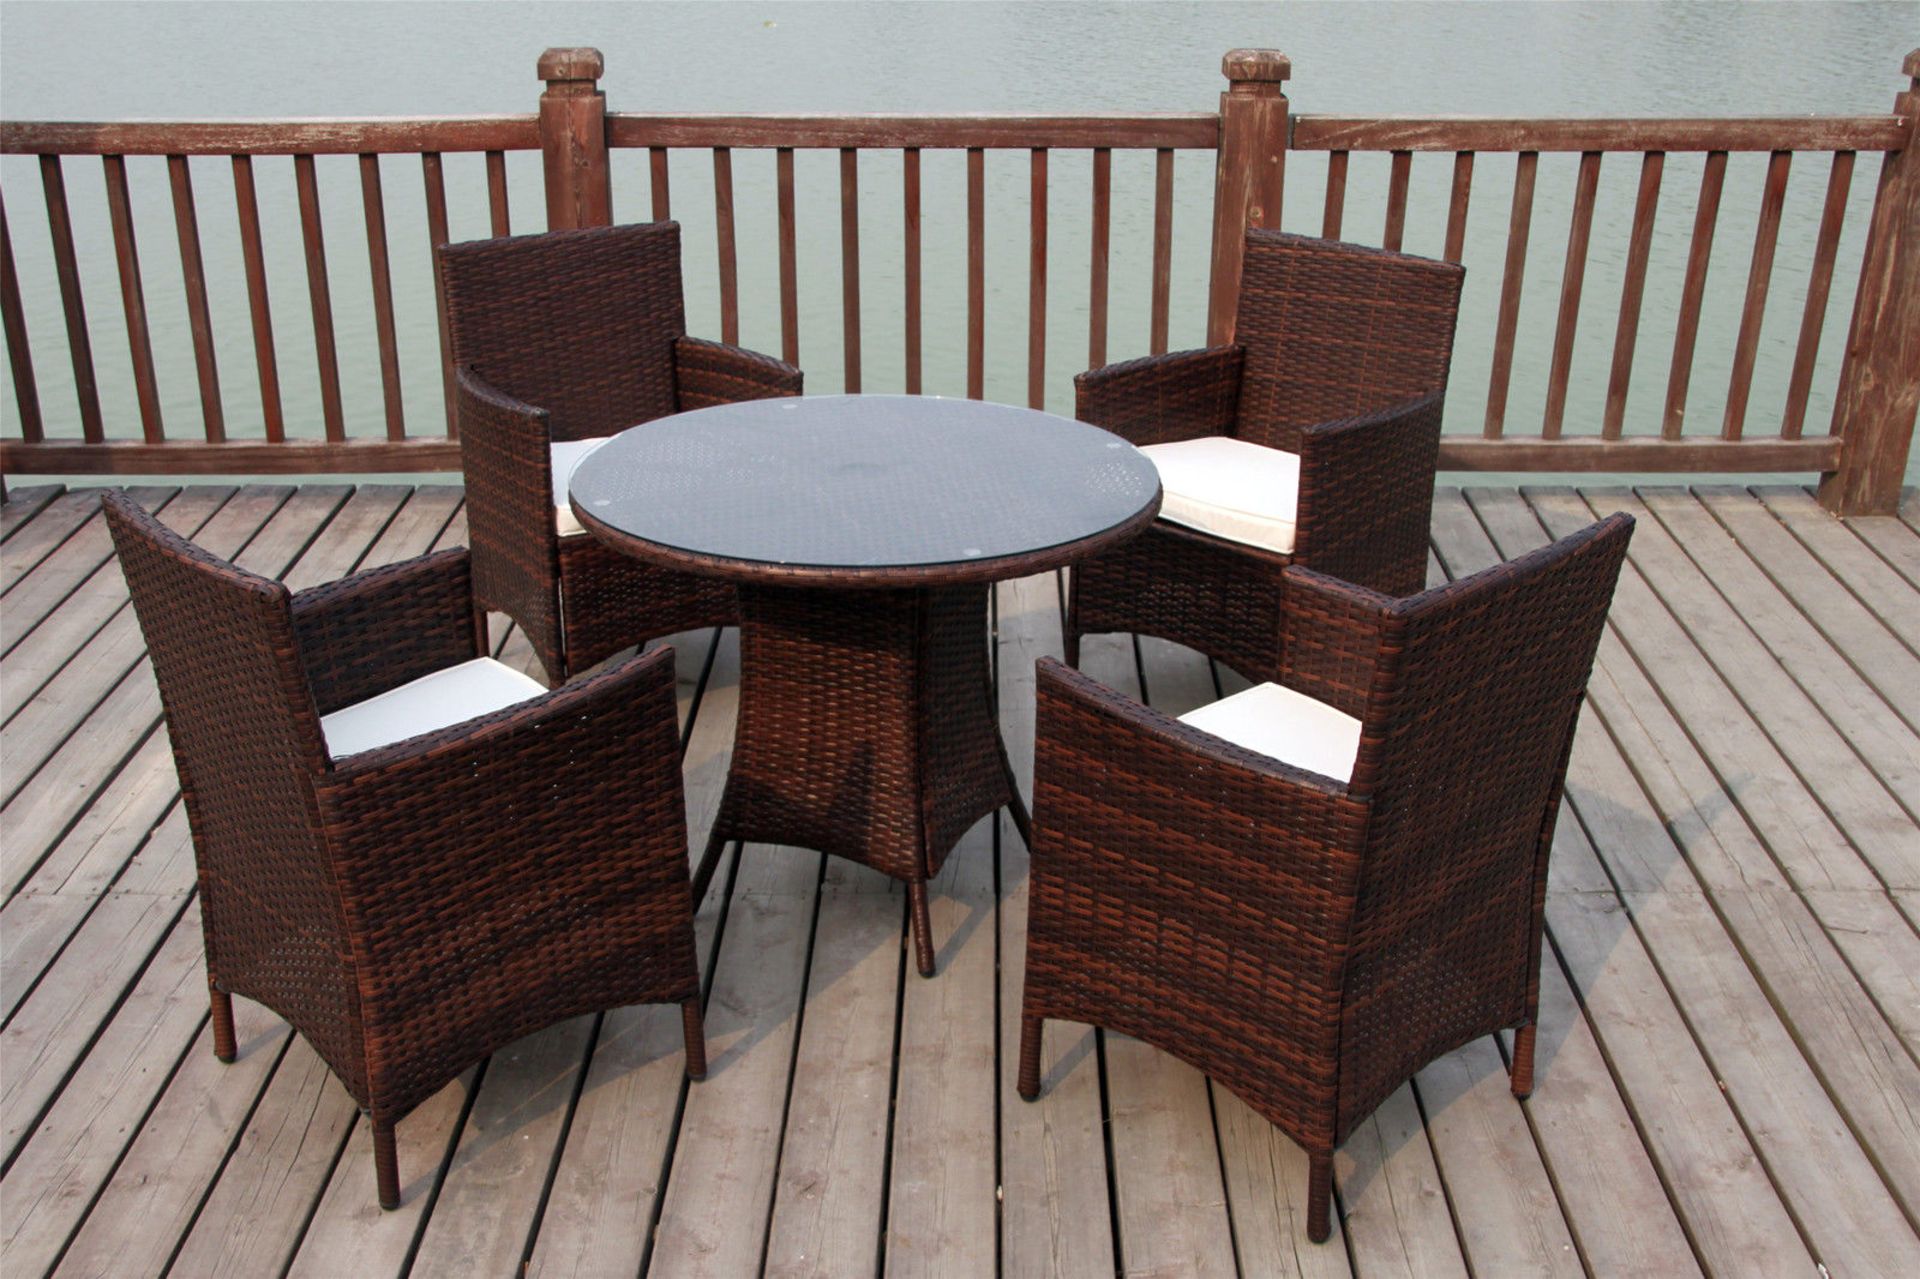 + VAT Brand New Chelsea Garden Company Four Person Light Brown Rattan Outdoor Dining Set - Includes